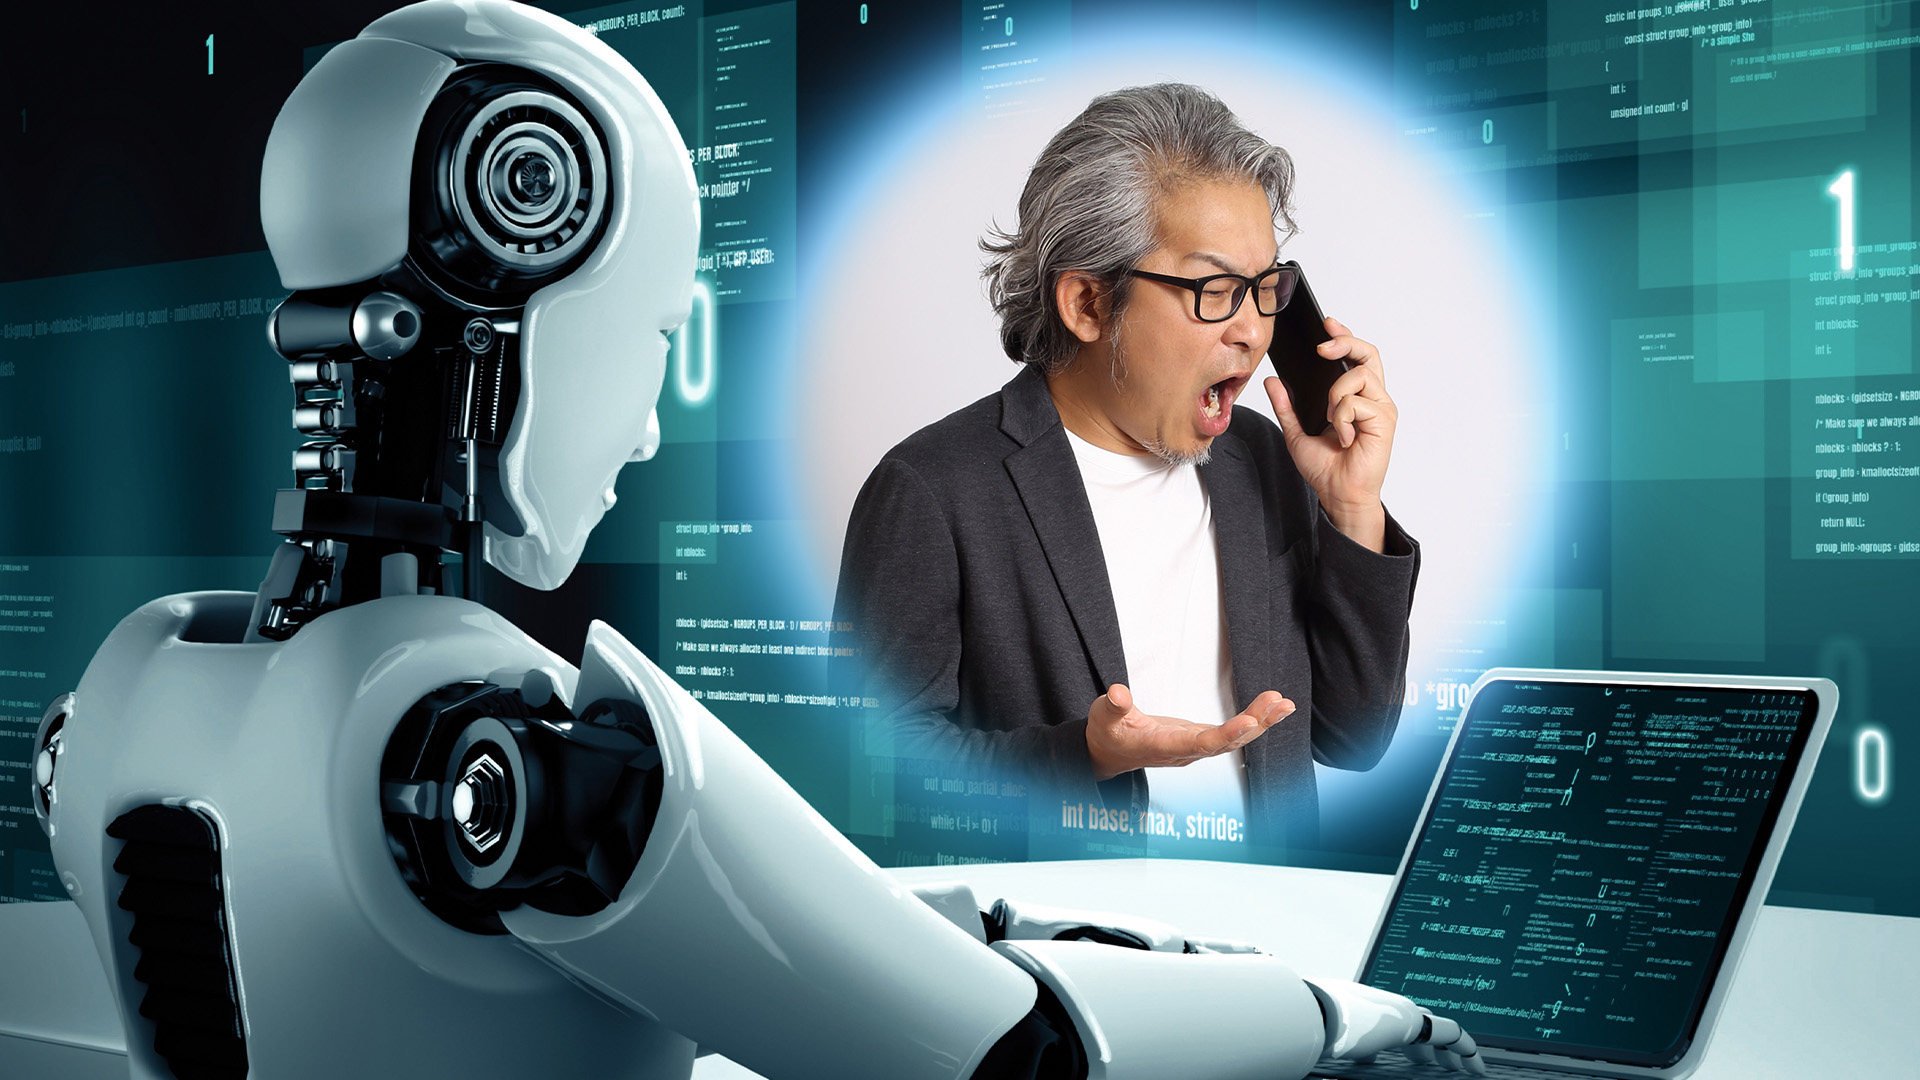 A telecoms giant in Japan is working towards launching an artificial intelligence voice filter that calms the voices of angry customers in a bid to protect the mental health of its customer services staff. Photo: SCMP composite/Shutterstock